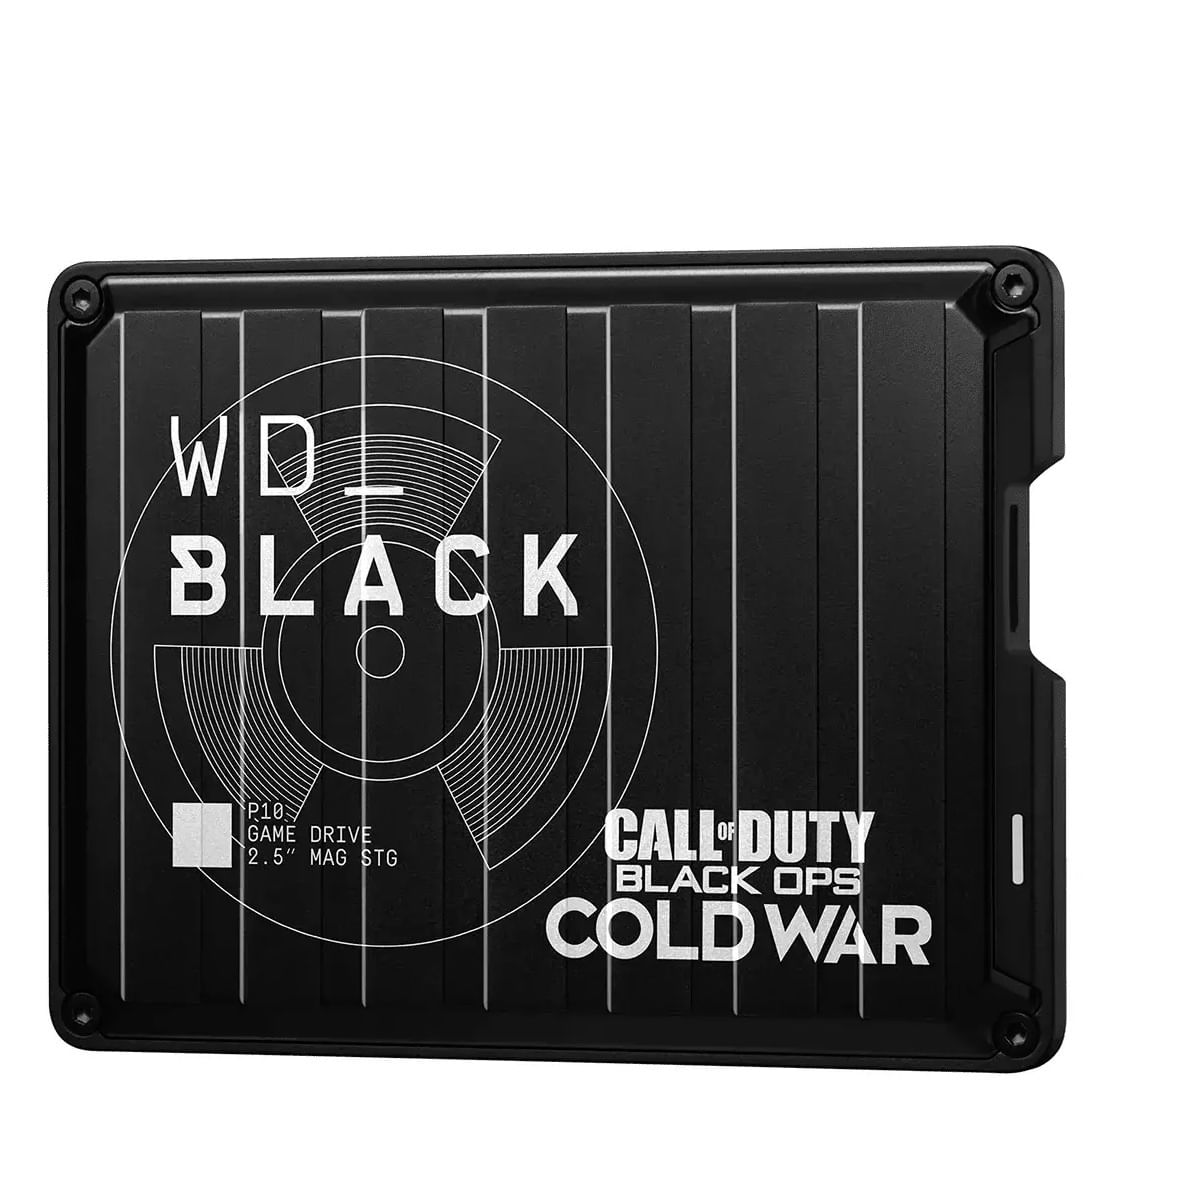 Disco Duro WD P10 2 TB Call of Duty Black Ops Cold War Special Edition WDBAZC0020BBK-WESN